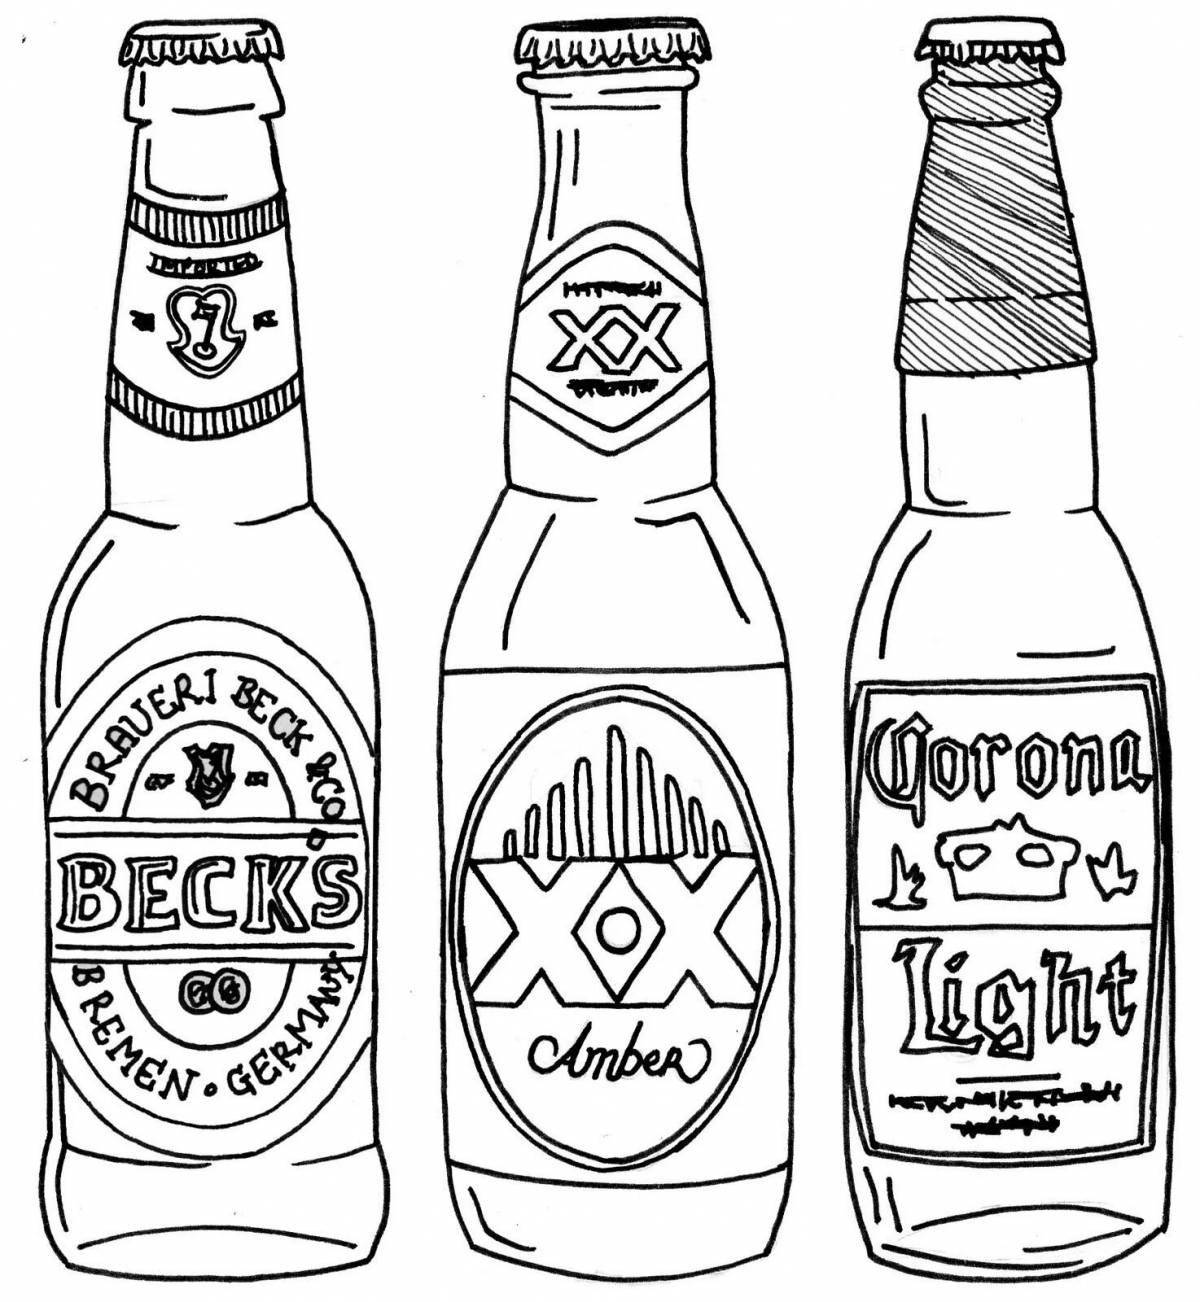 Coloring book shining bottle of alcohol